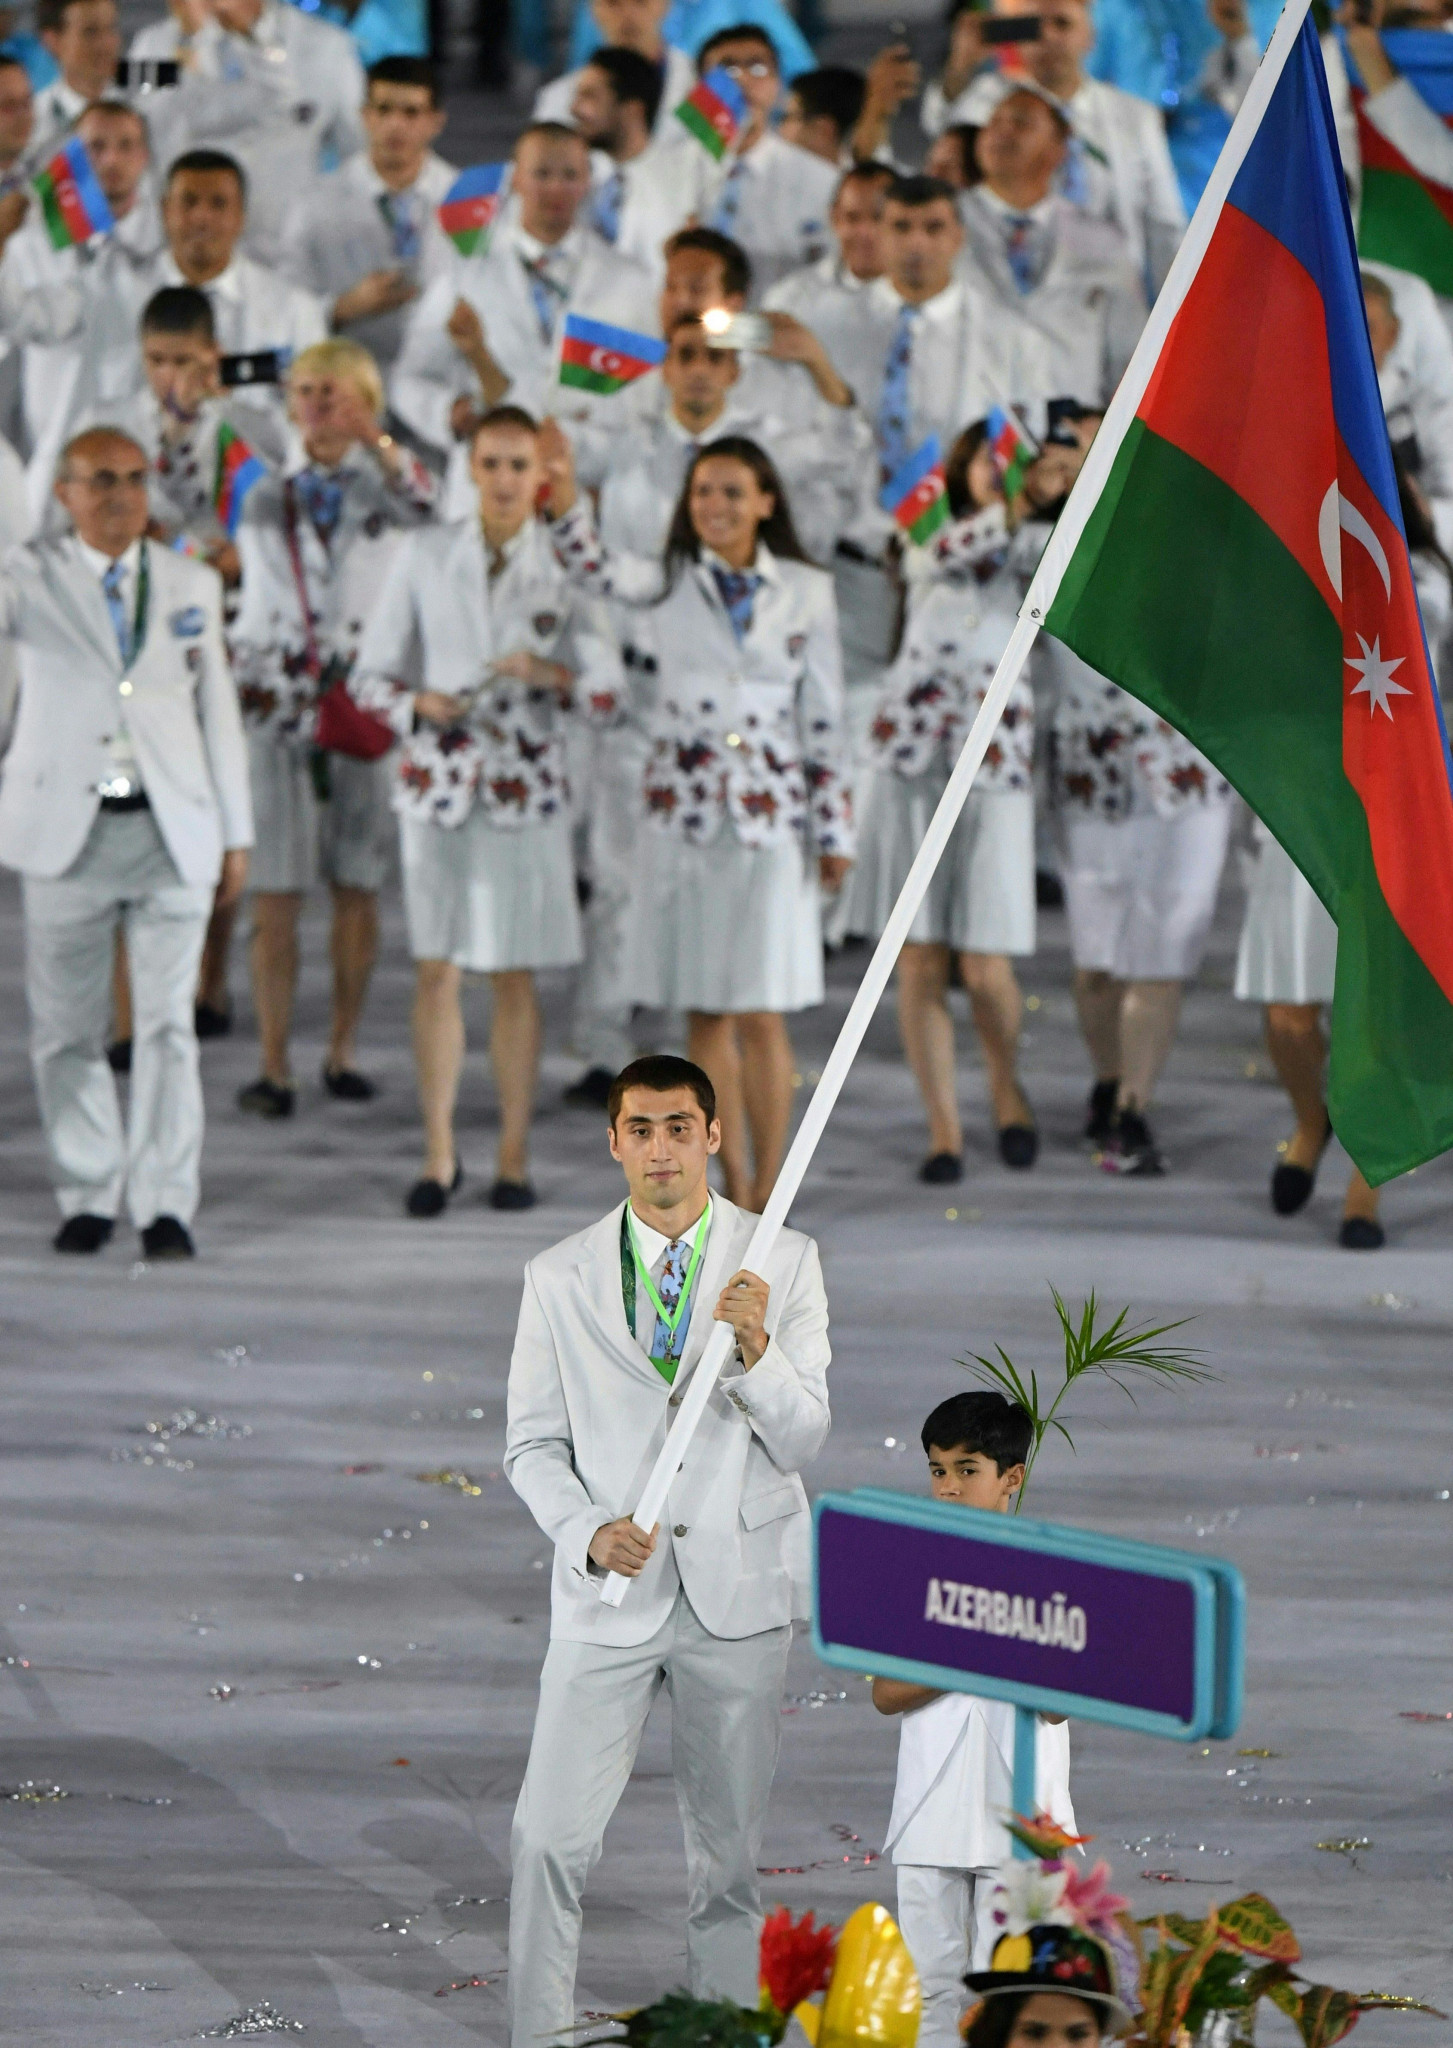 Azerbaijan's best Olympic performance came at the Rio 2016 Games when they won 18 medals ©Getty Images